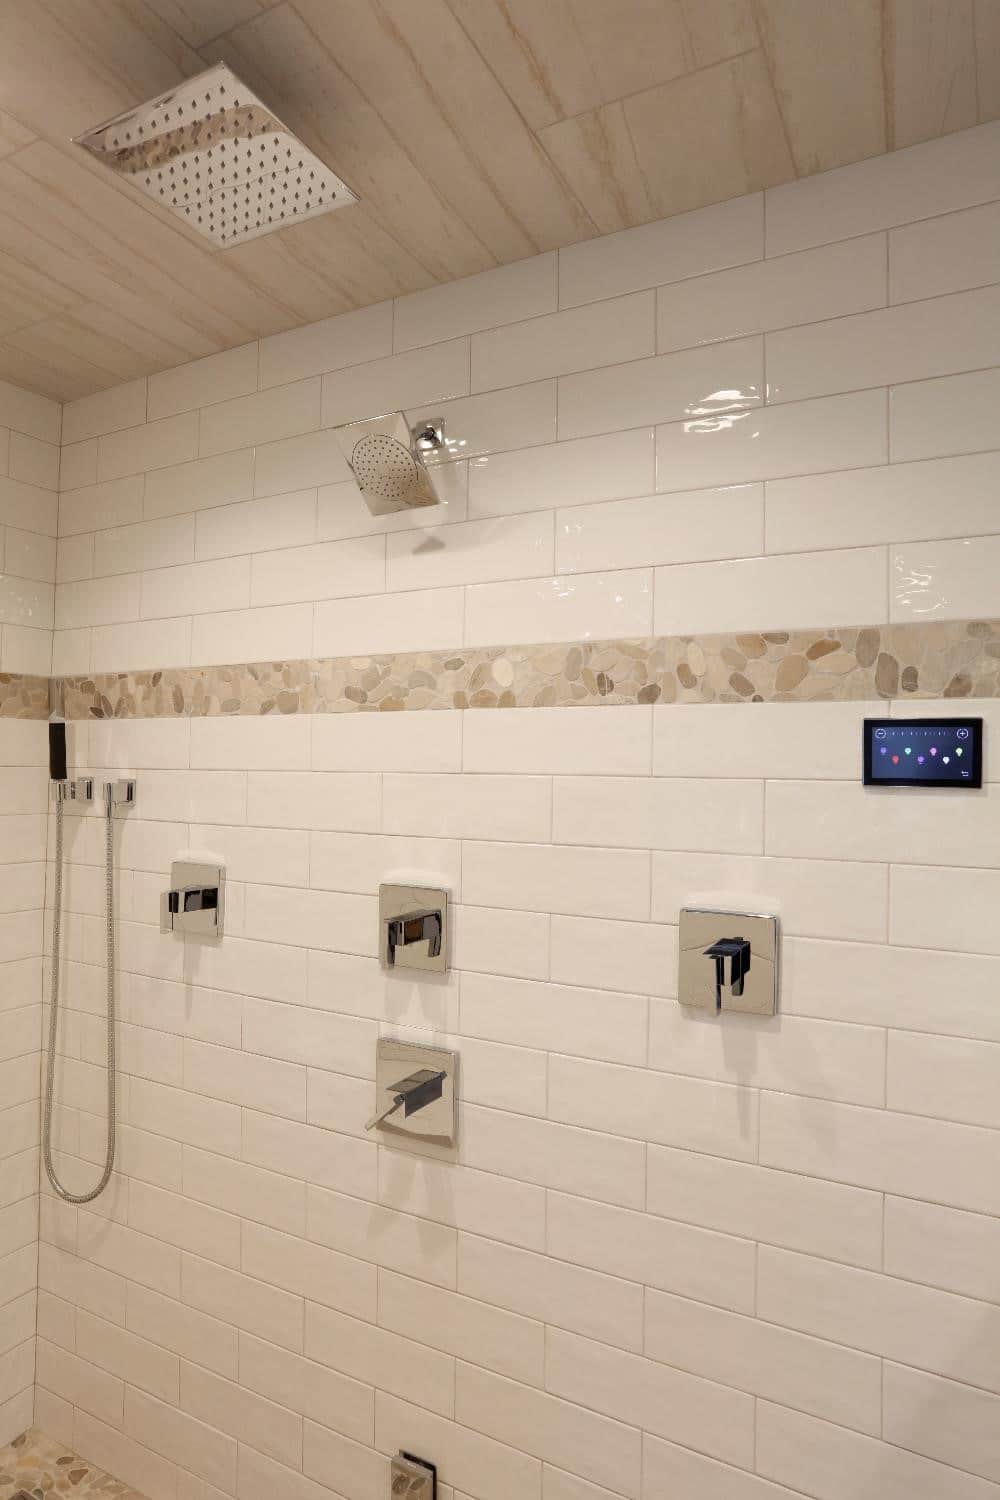 decorative tile accents in shower